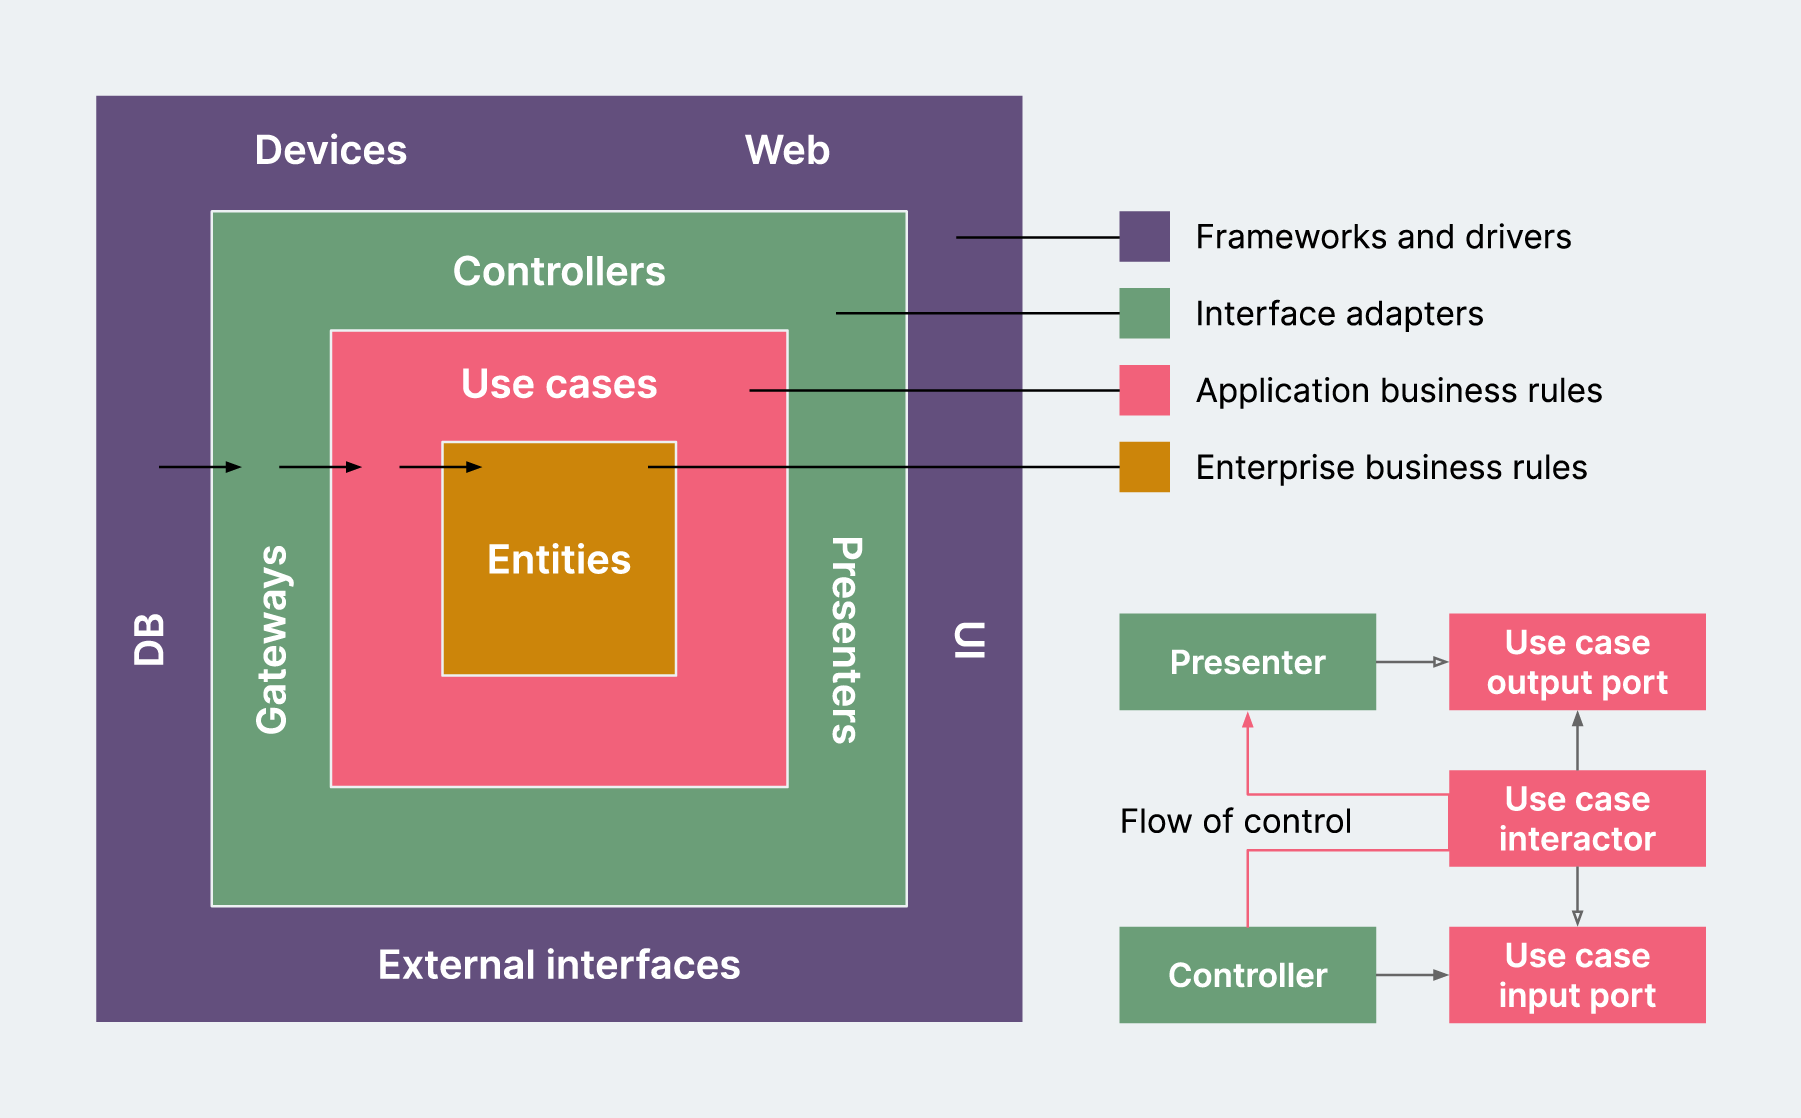 the domain model is referred to as an “entity”. Entity contains business-specific rules and logic, while the application operation specific logic sits in the use case. These use cases orchestrate operations on top of entities to direct them to execute their business rules to achieve the goals of the use case.